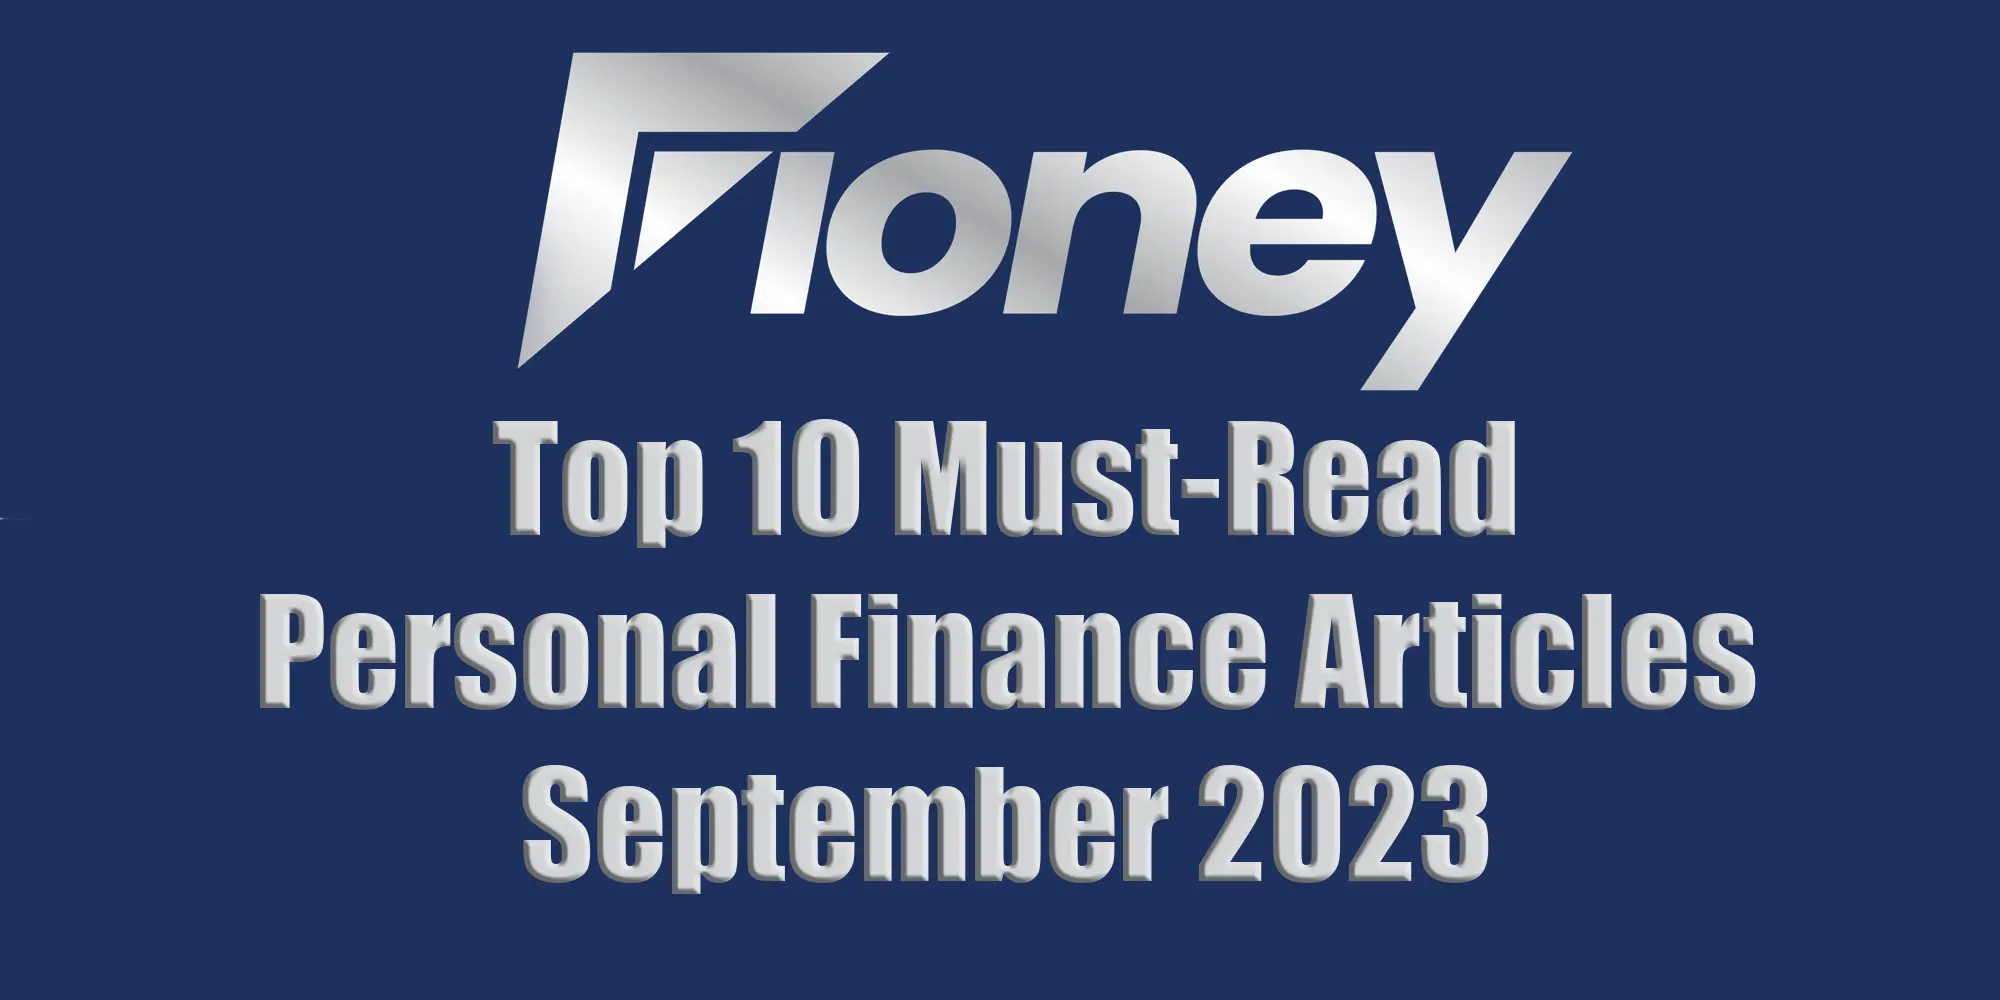 Fioney: Top 10 Must Read Personal Finance Articles September 2023